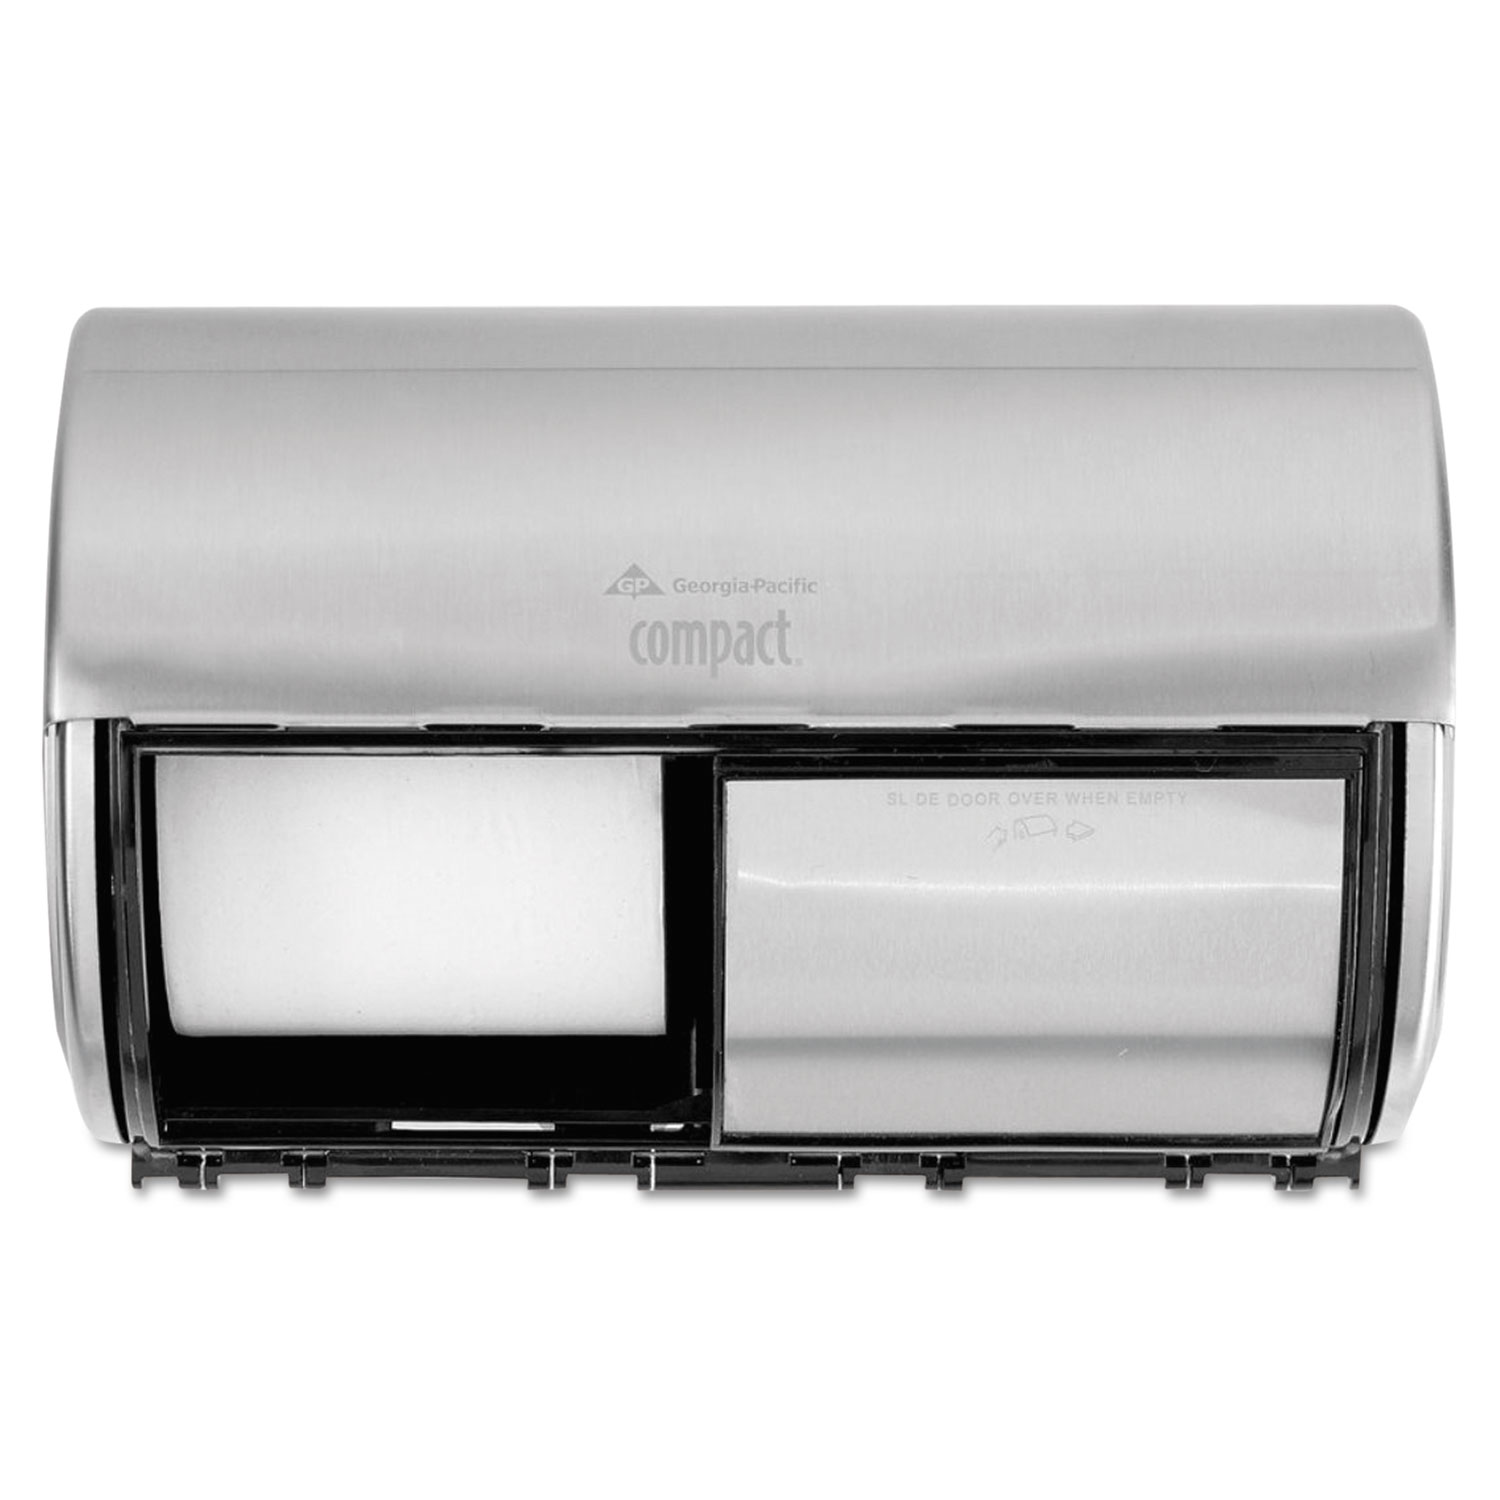  Georgia Pacific Professional 56798 Compact Coreless Side-by-Side 2-Roll Dispenser, 10.13 x 6.75 x 7.13, Stainless (GPC56798) 